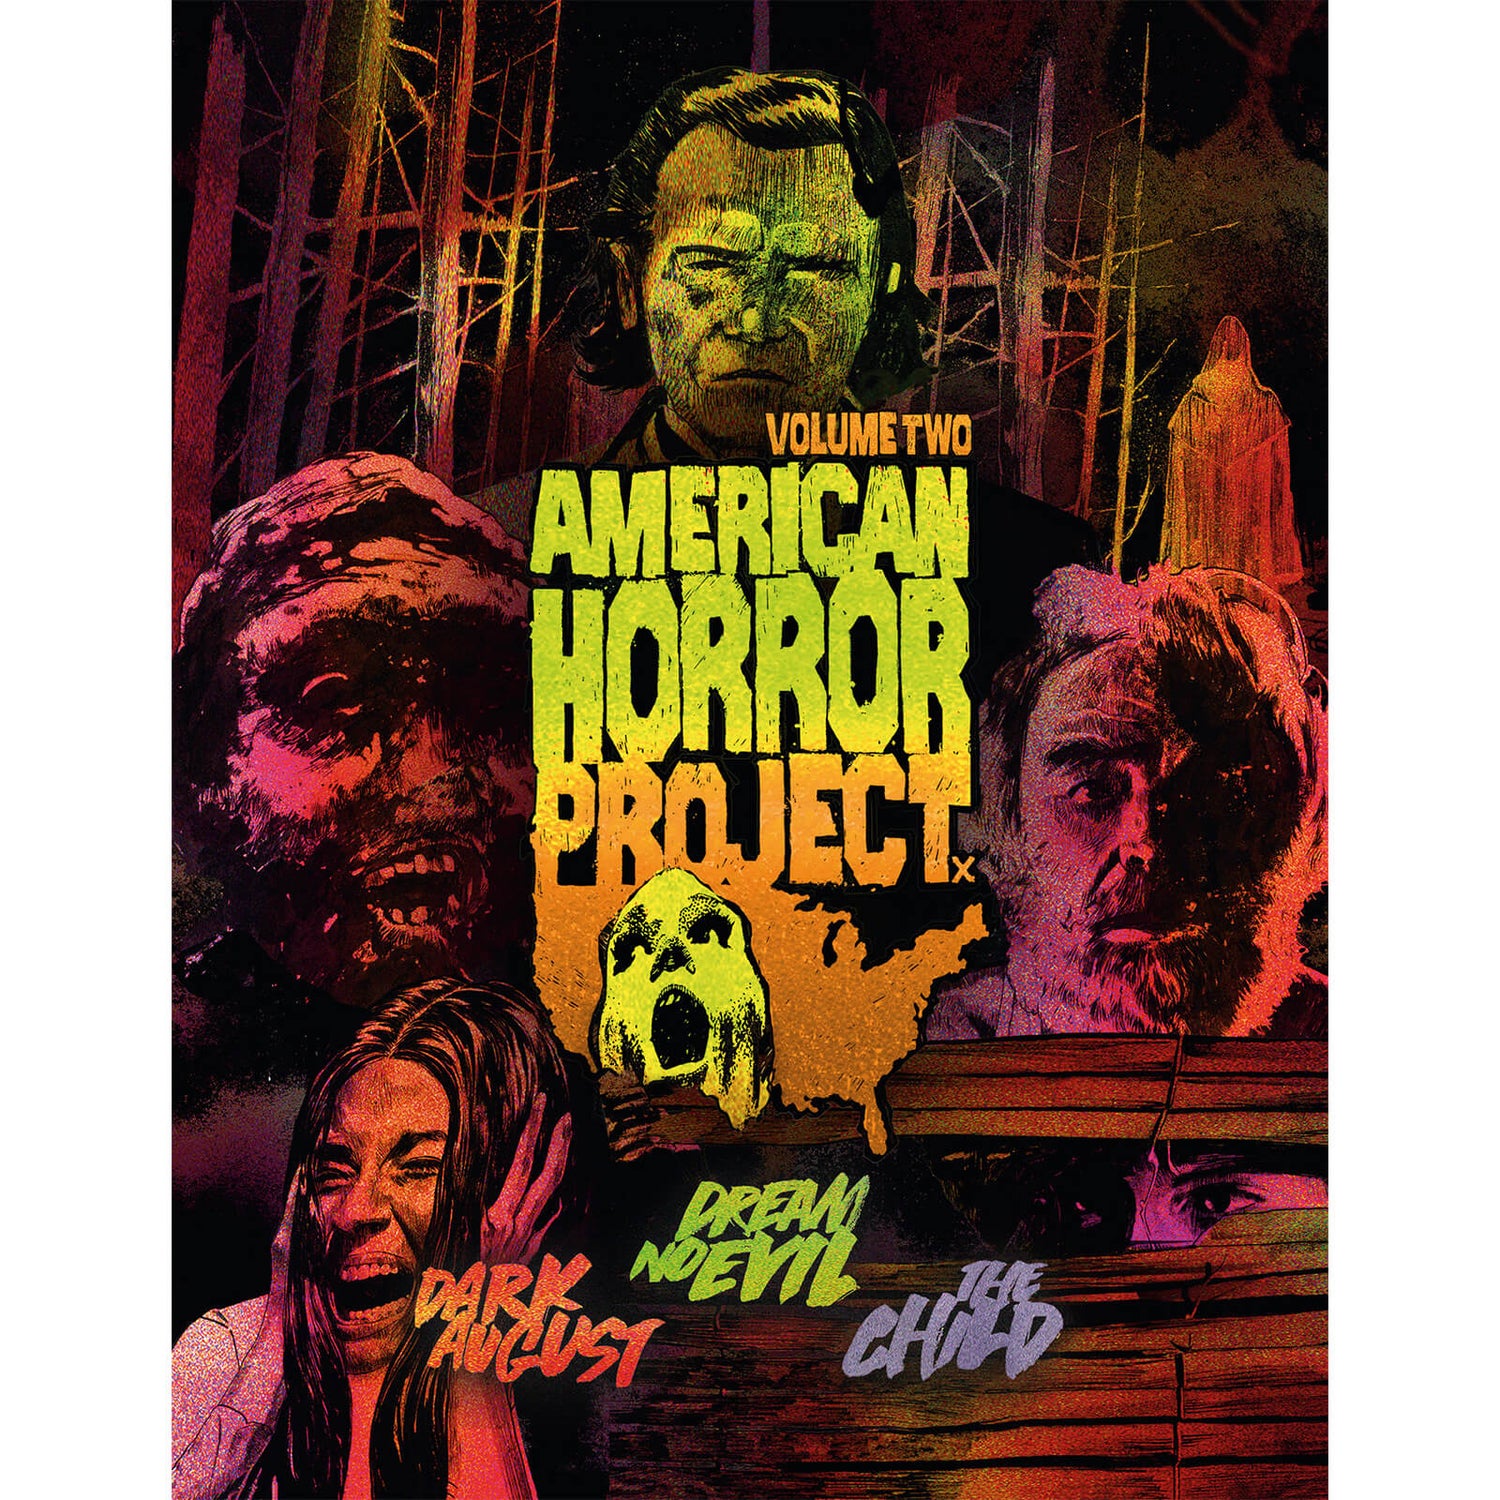 American Horror Project Vol. 2 Limited Edition Blu-ray